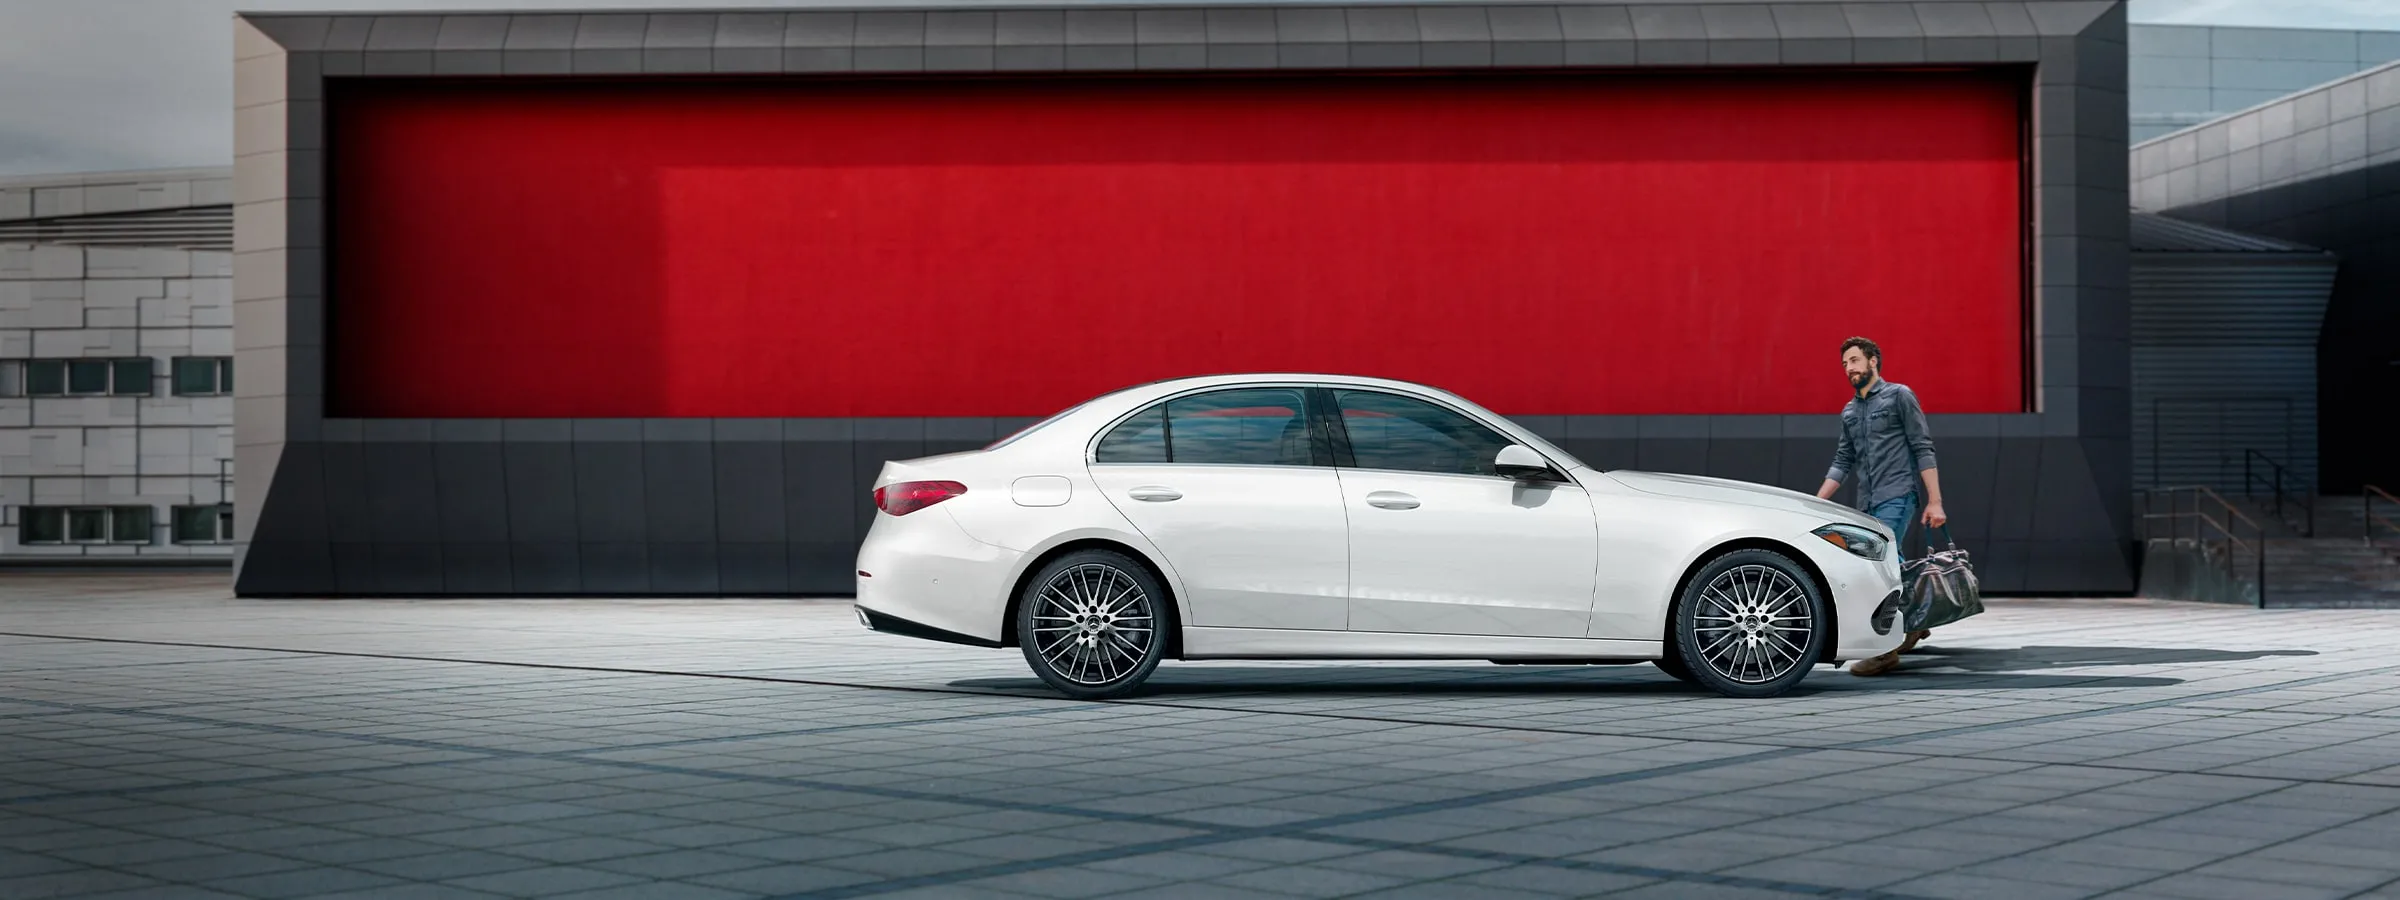 Enhance Your Ride with Mercedes-Benz C-Class Accessories